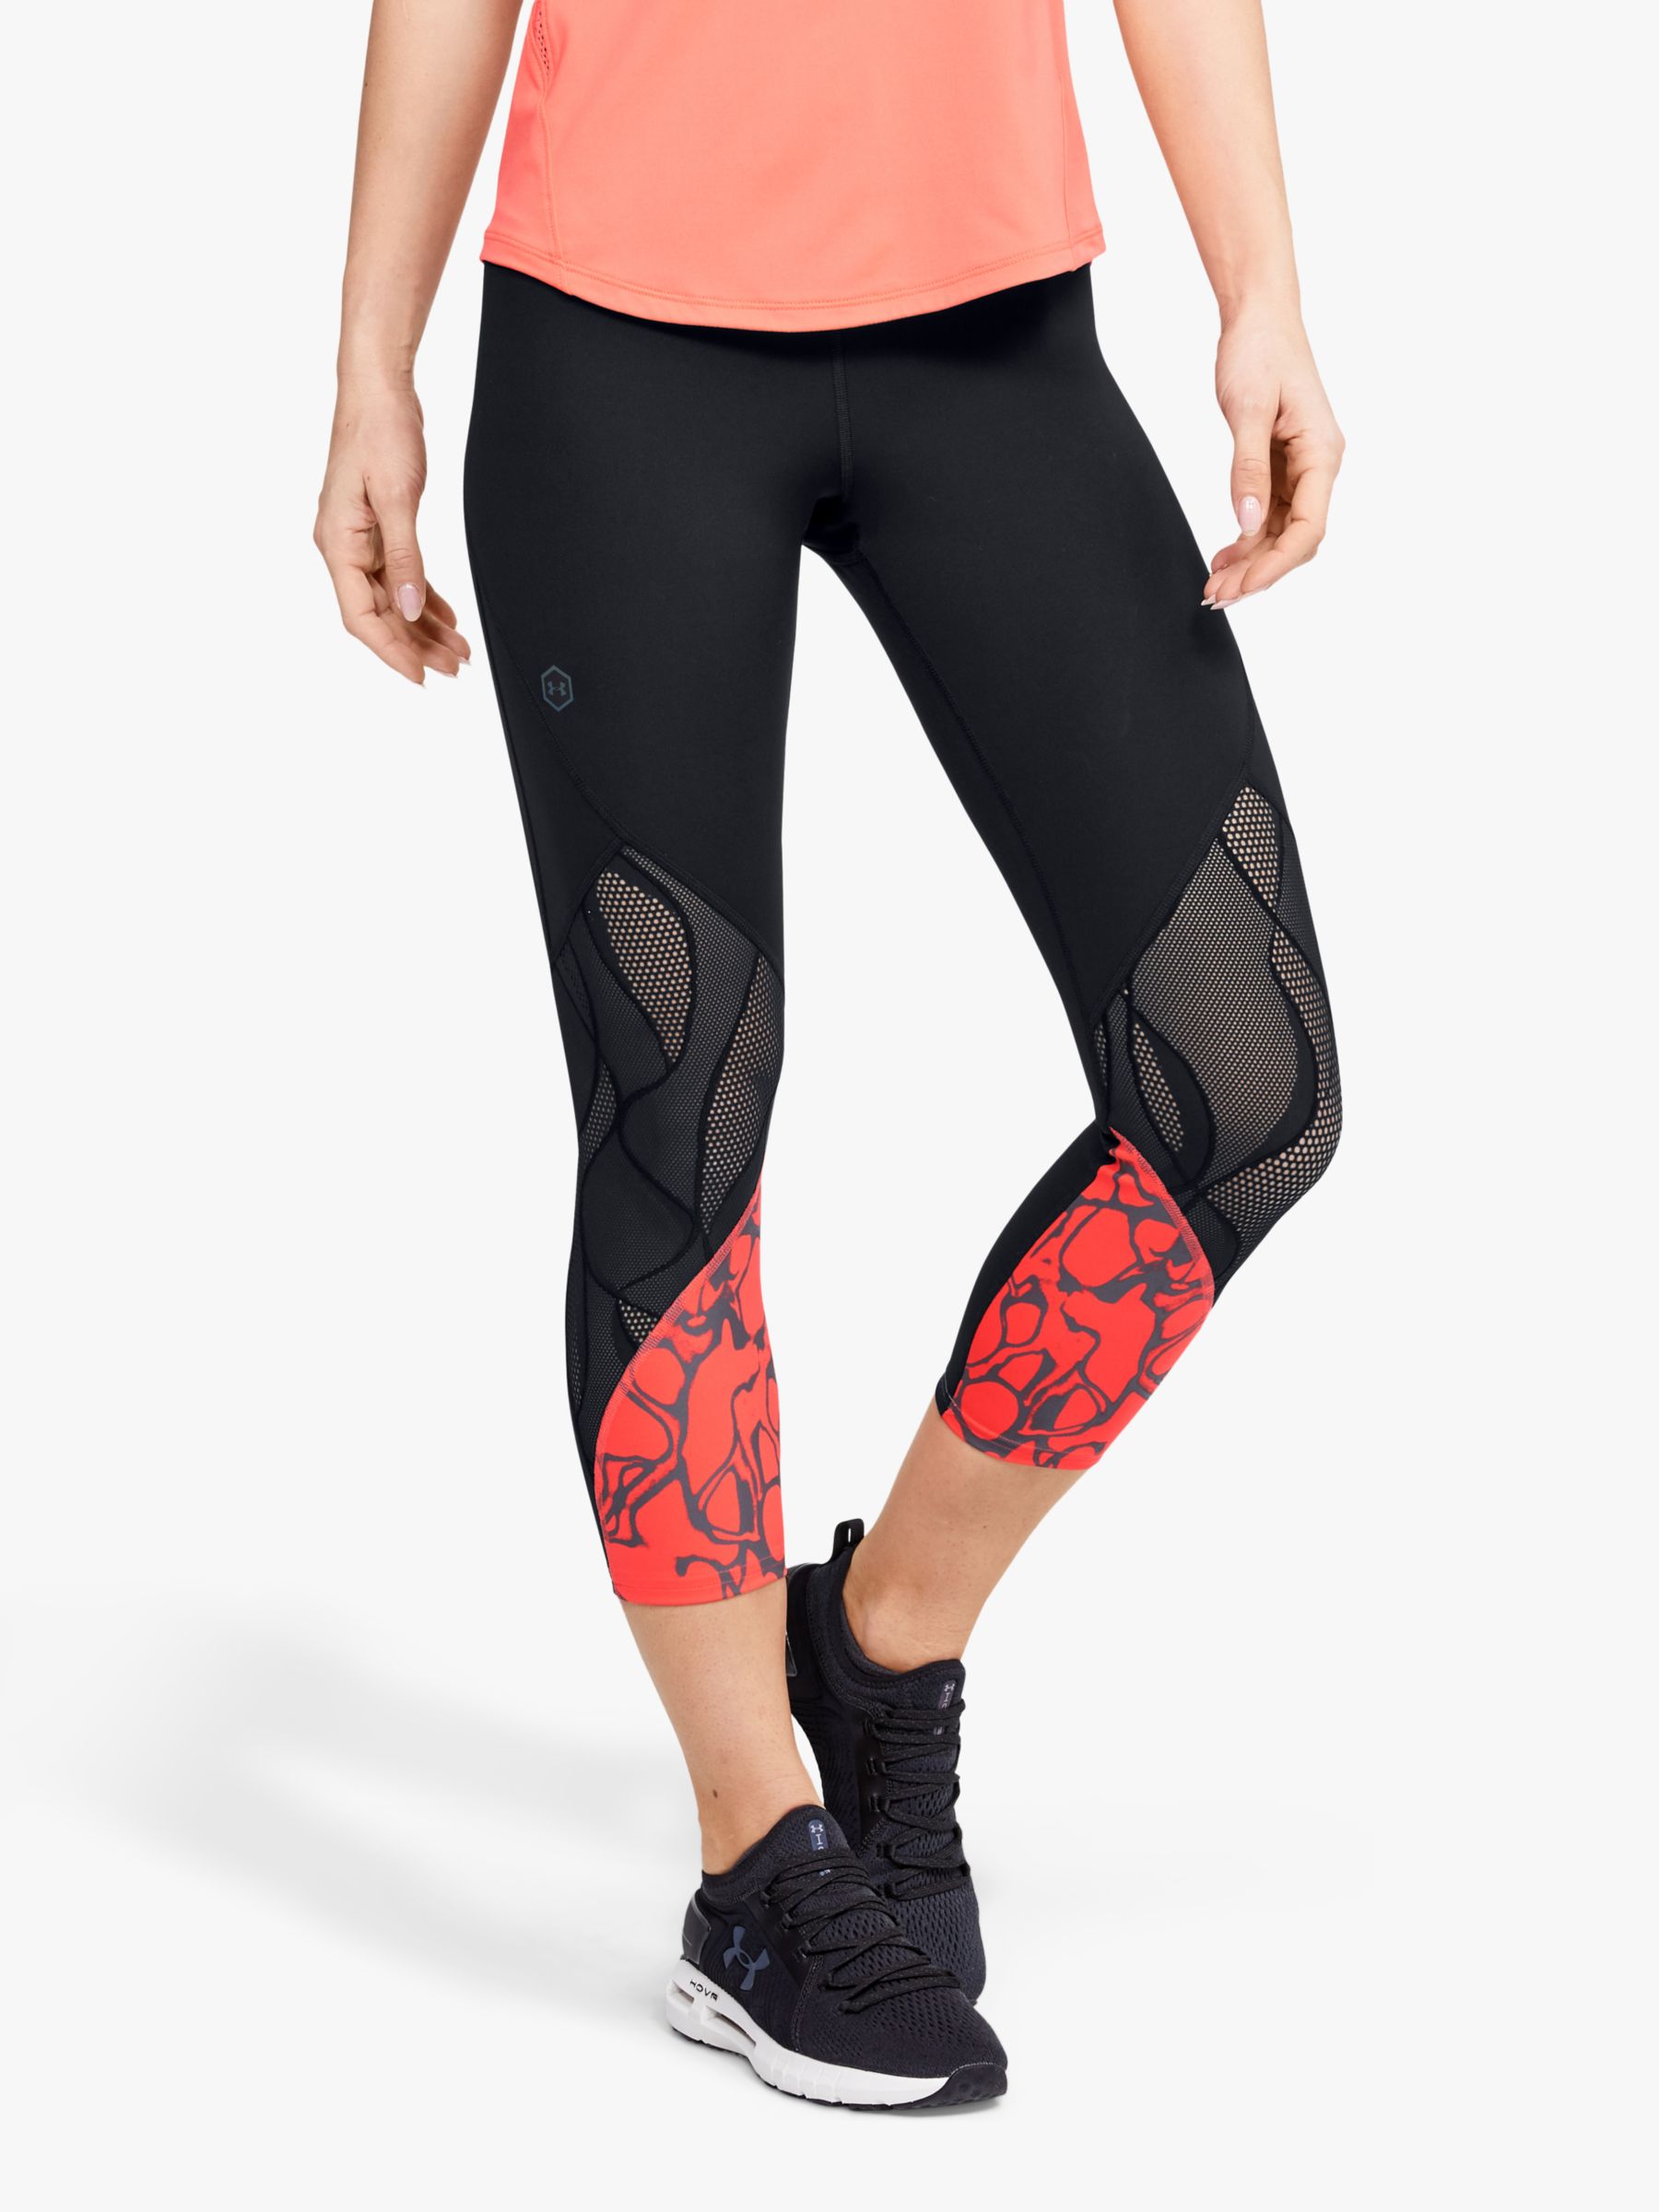 under armour red tights